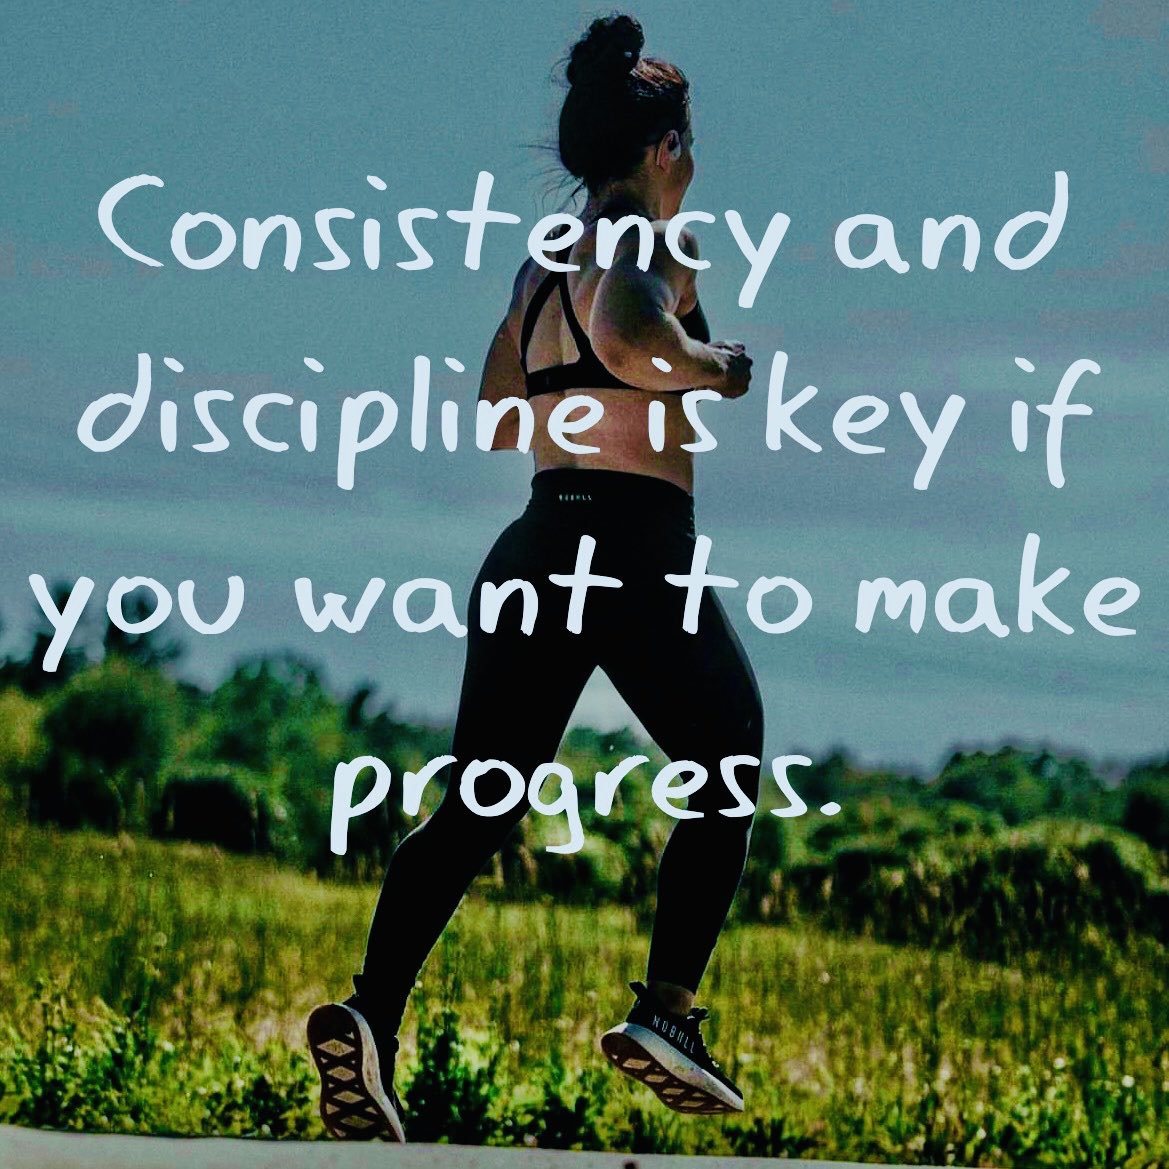 #dedication #workout #consistency #nutrition #focus #weightlossjourney #gymmotivation #weightloss #strength #fit #goals #transformation #positivevibes #healthylifestyle #fitnessjourney #noexcuses #hardwork #fitness #gym #mindset #progress #consistencyiskey #exercise